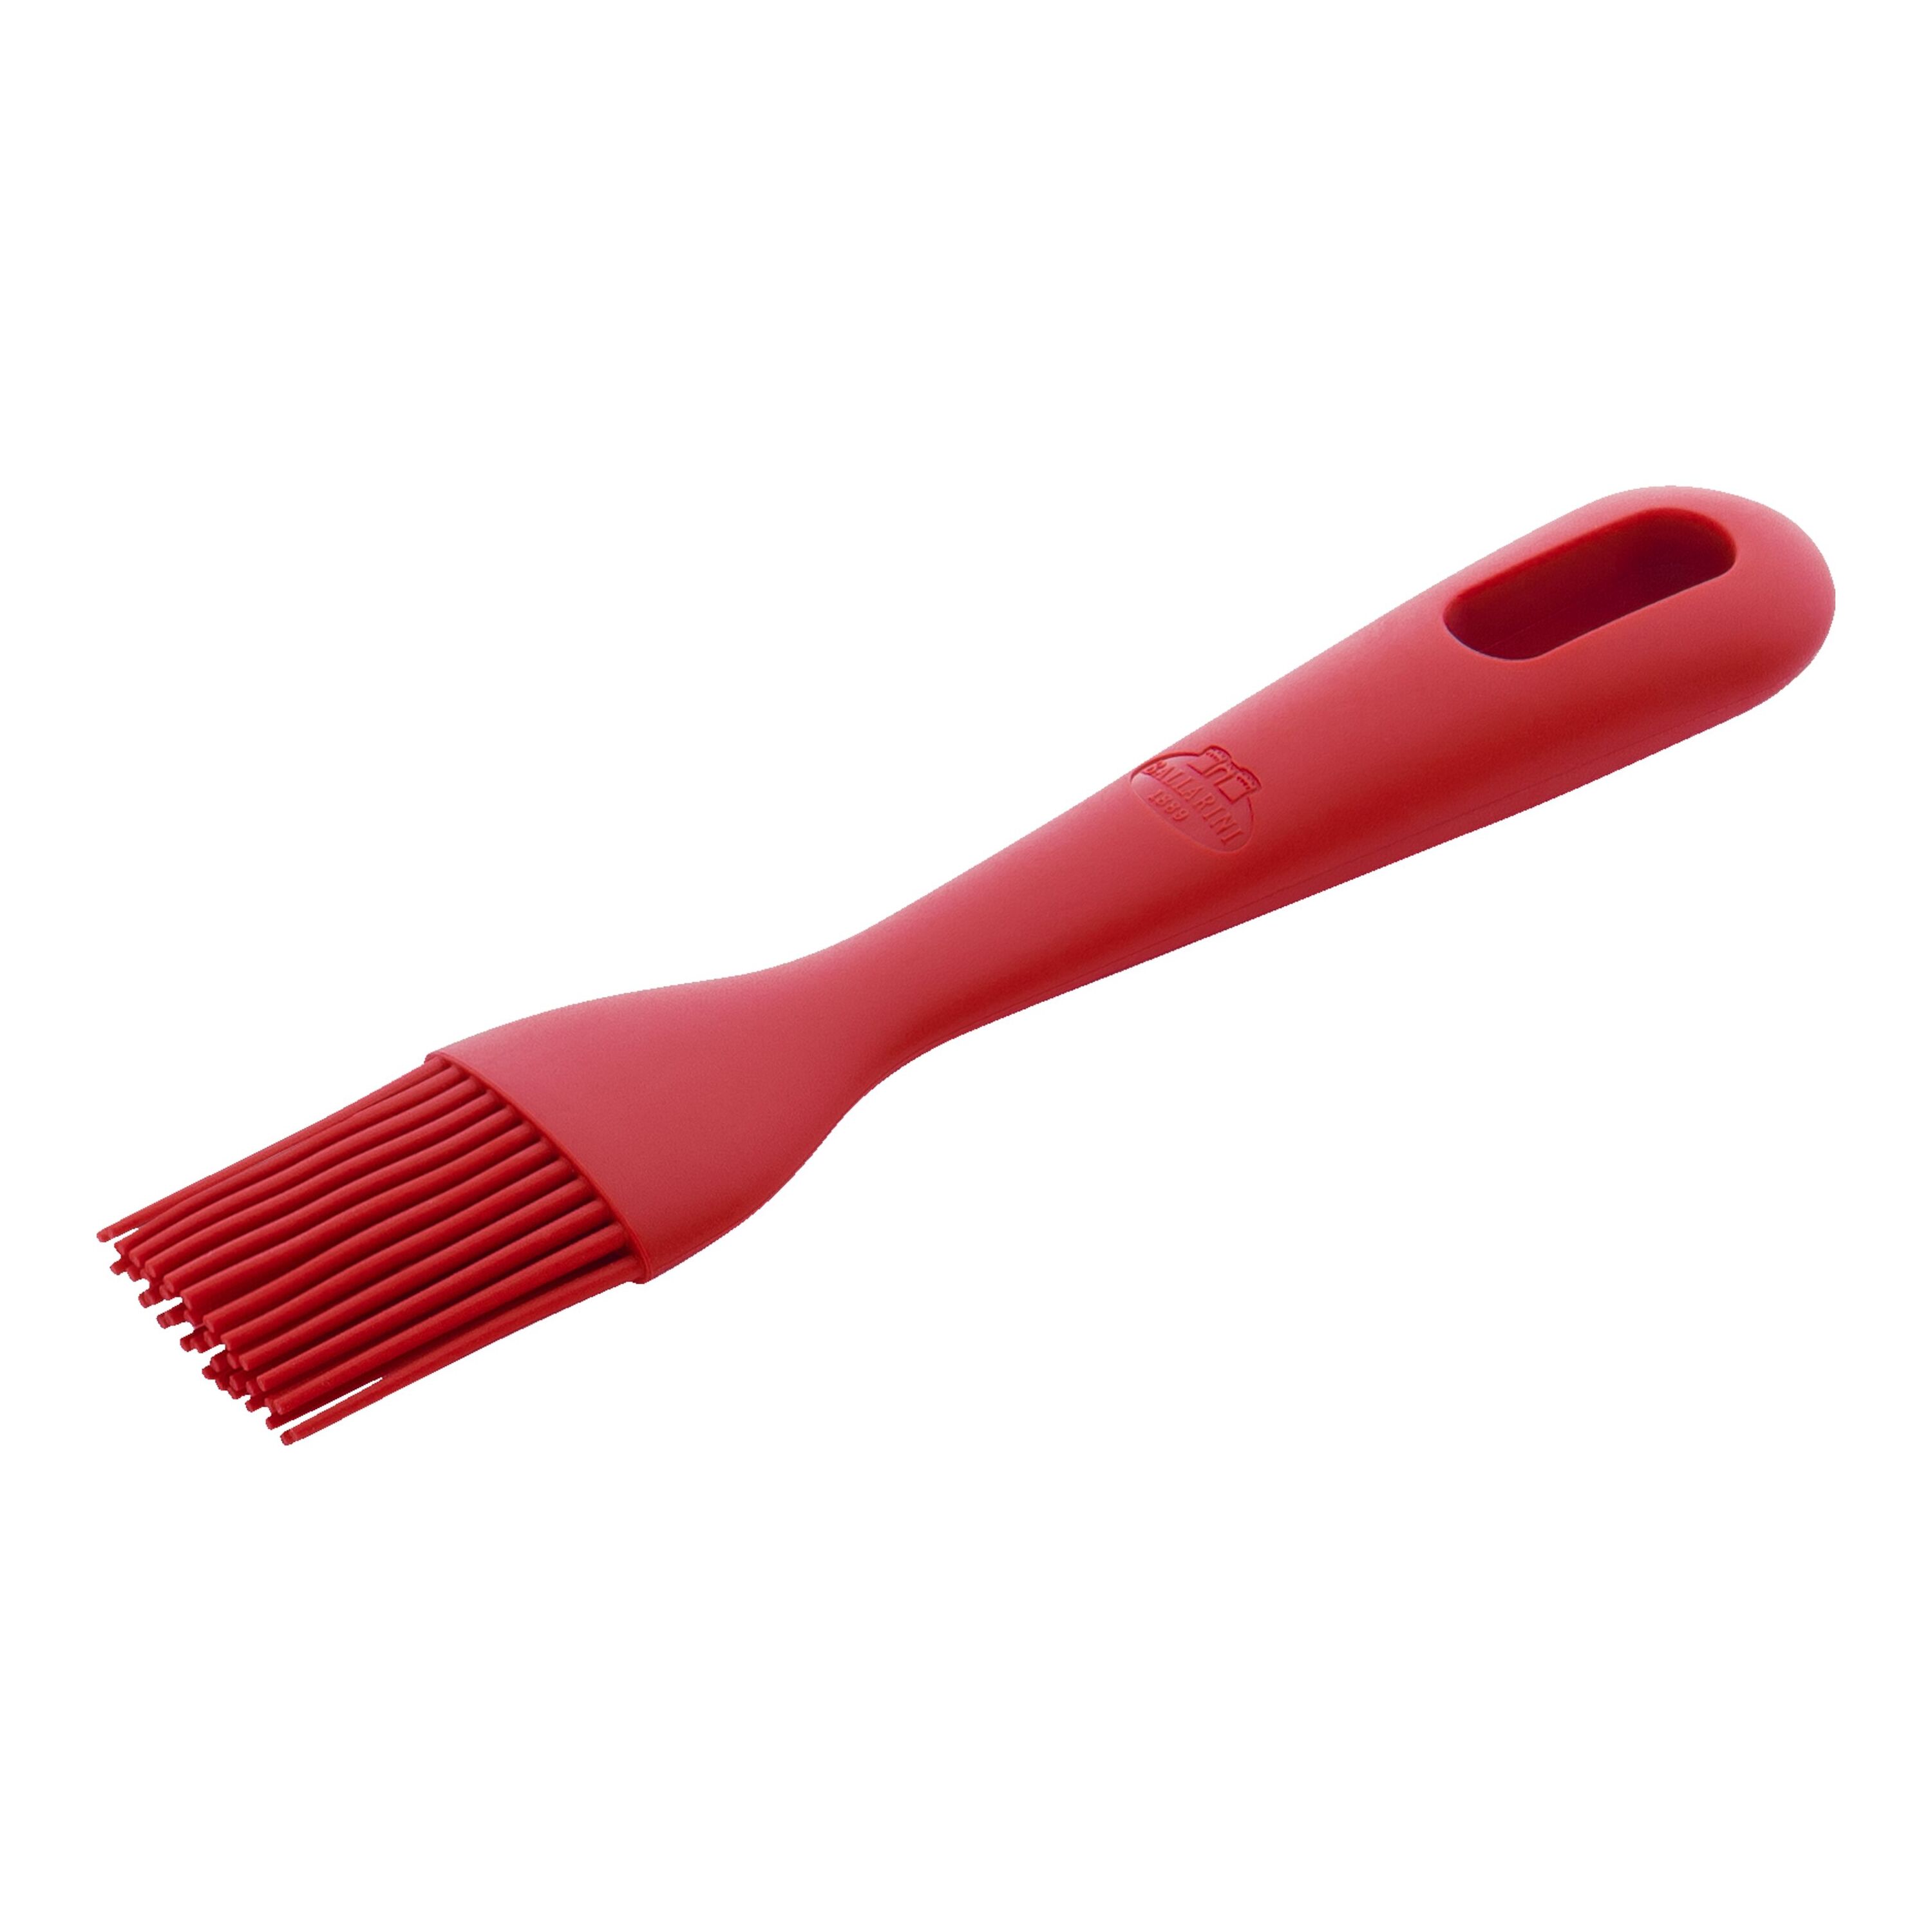 What to Use Instead of a Silicone Pastry Brush